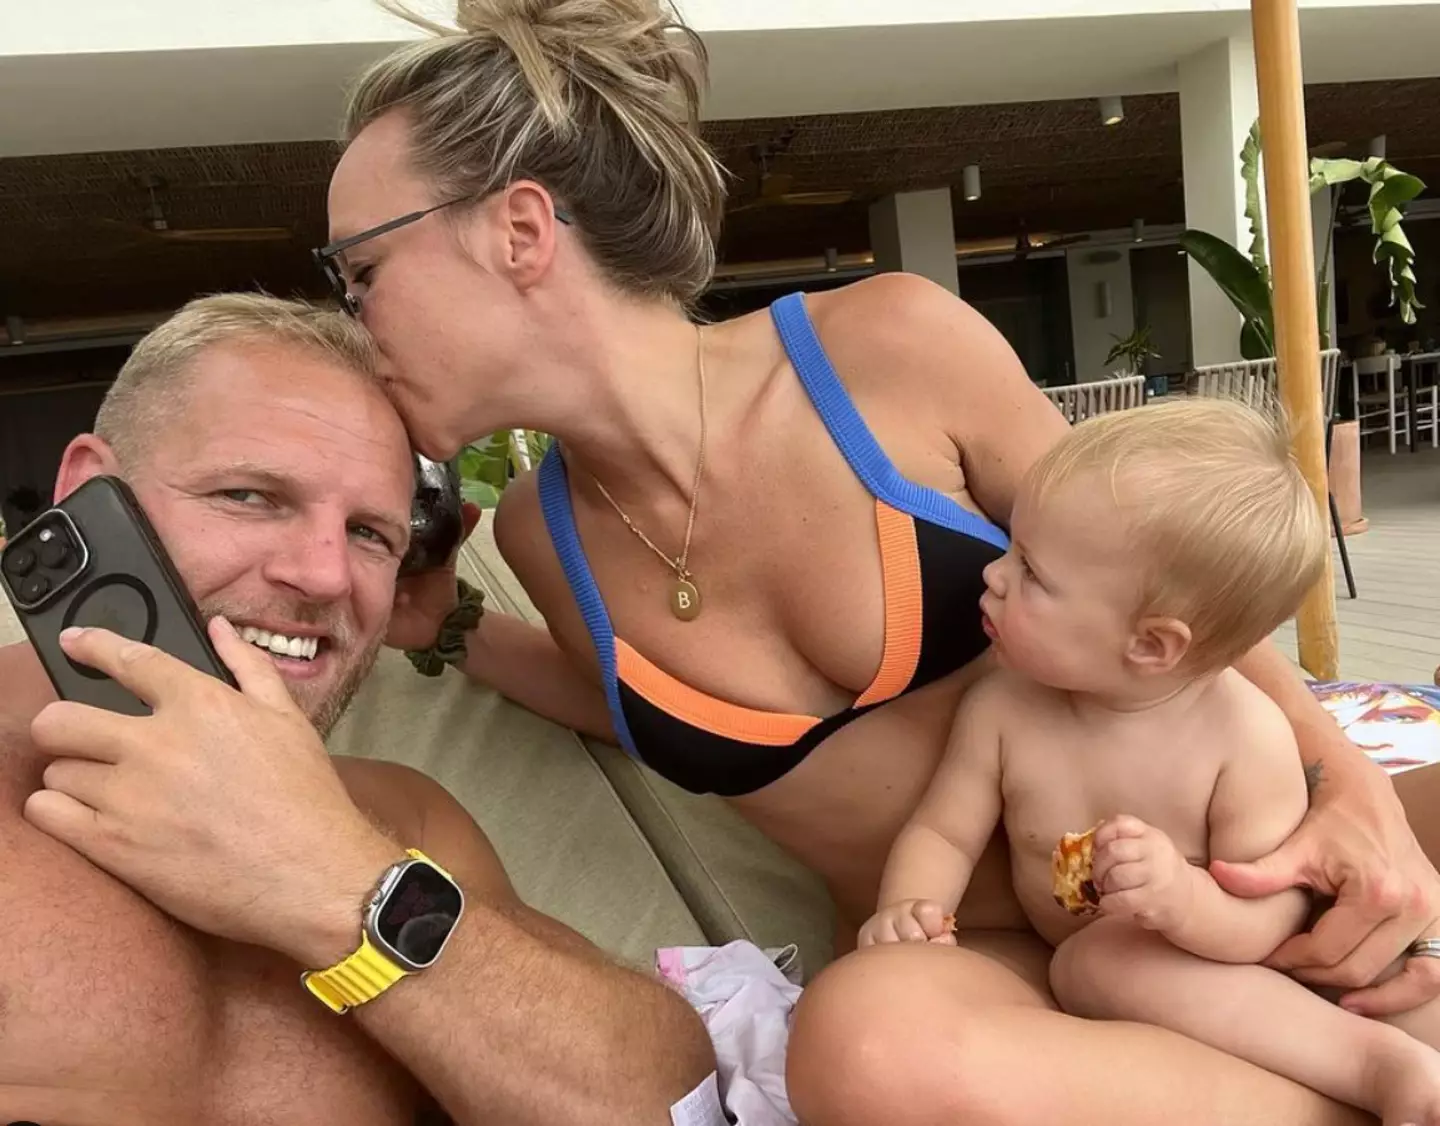 James Haskell and Chloe Madely announced their split after five years of marriage.